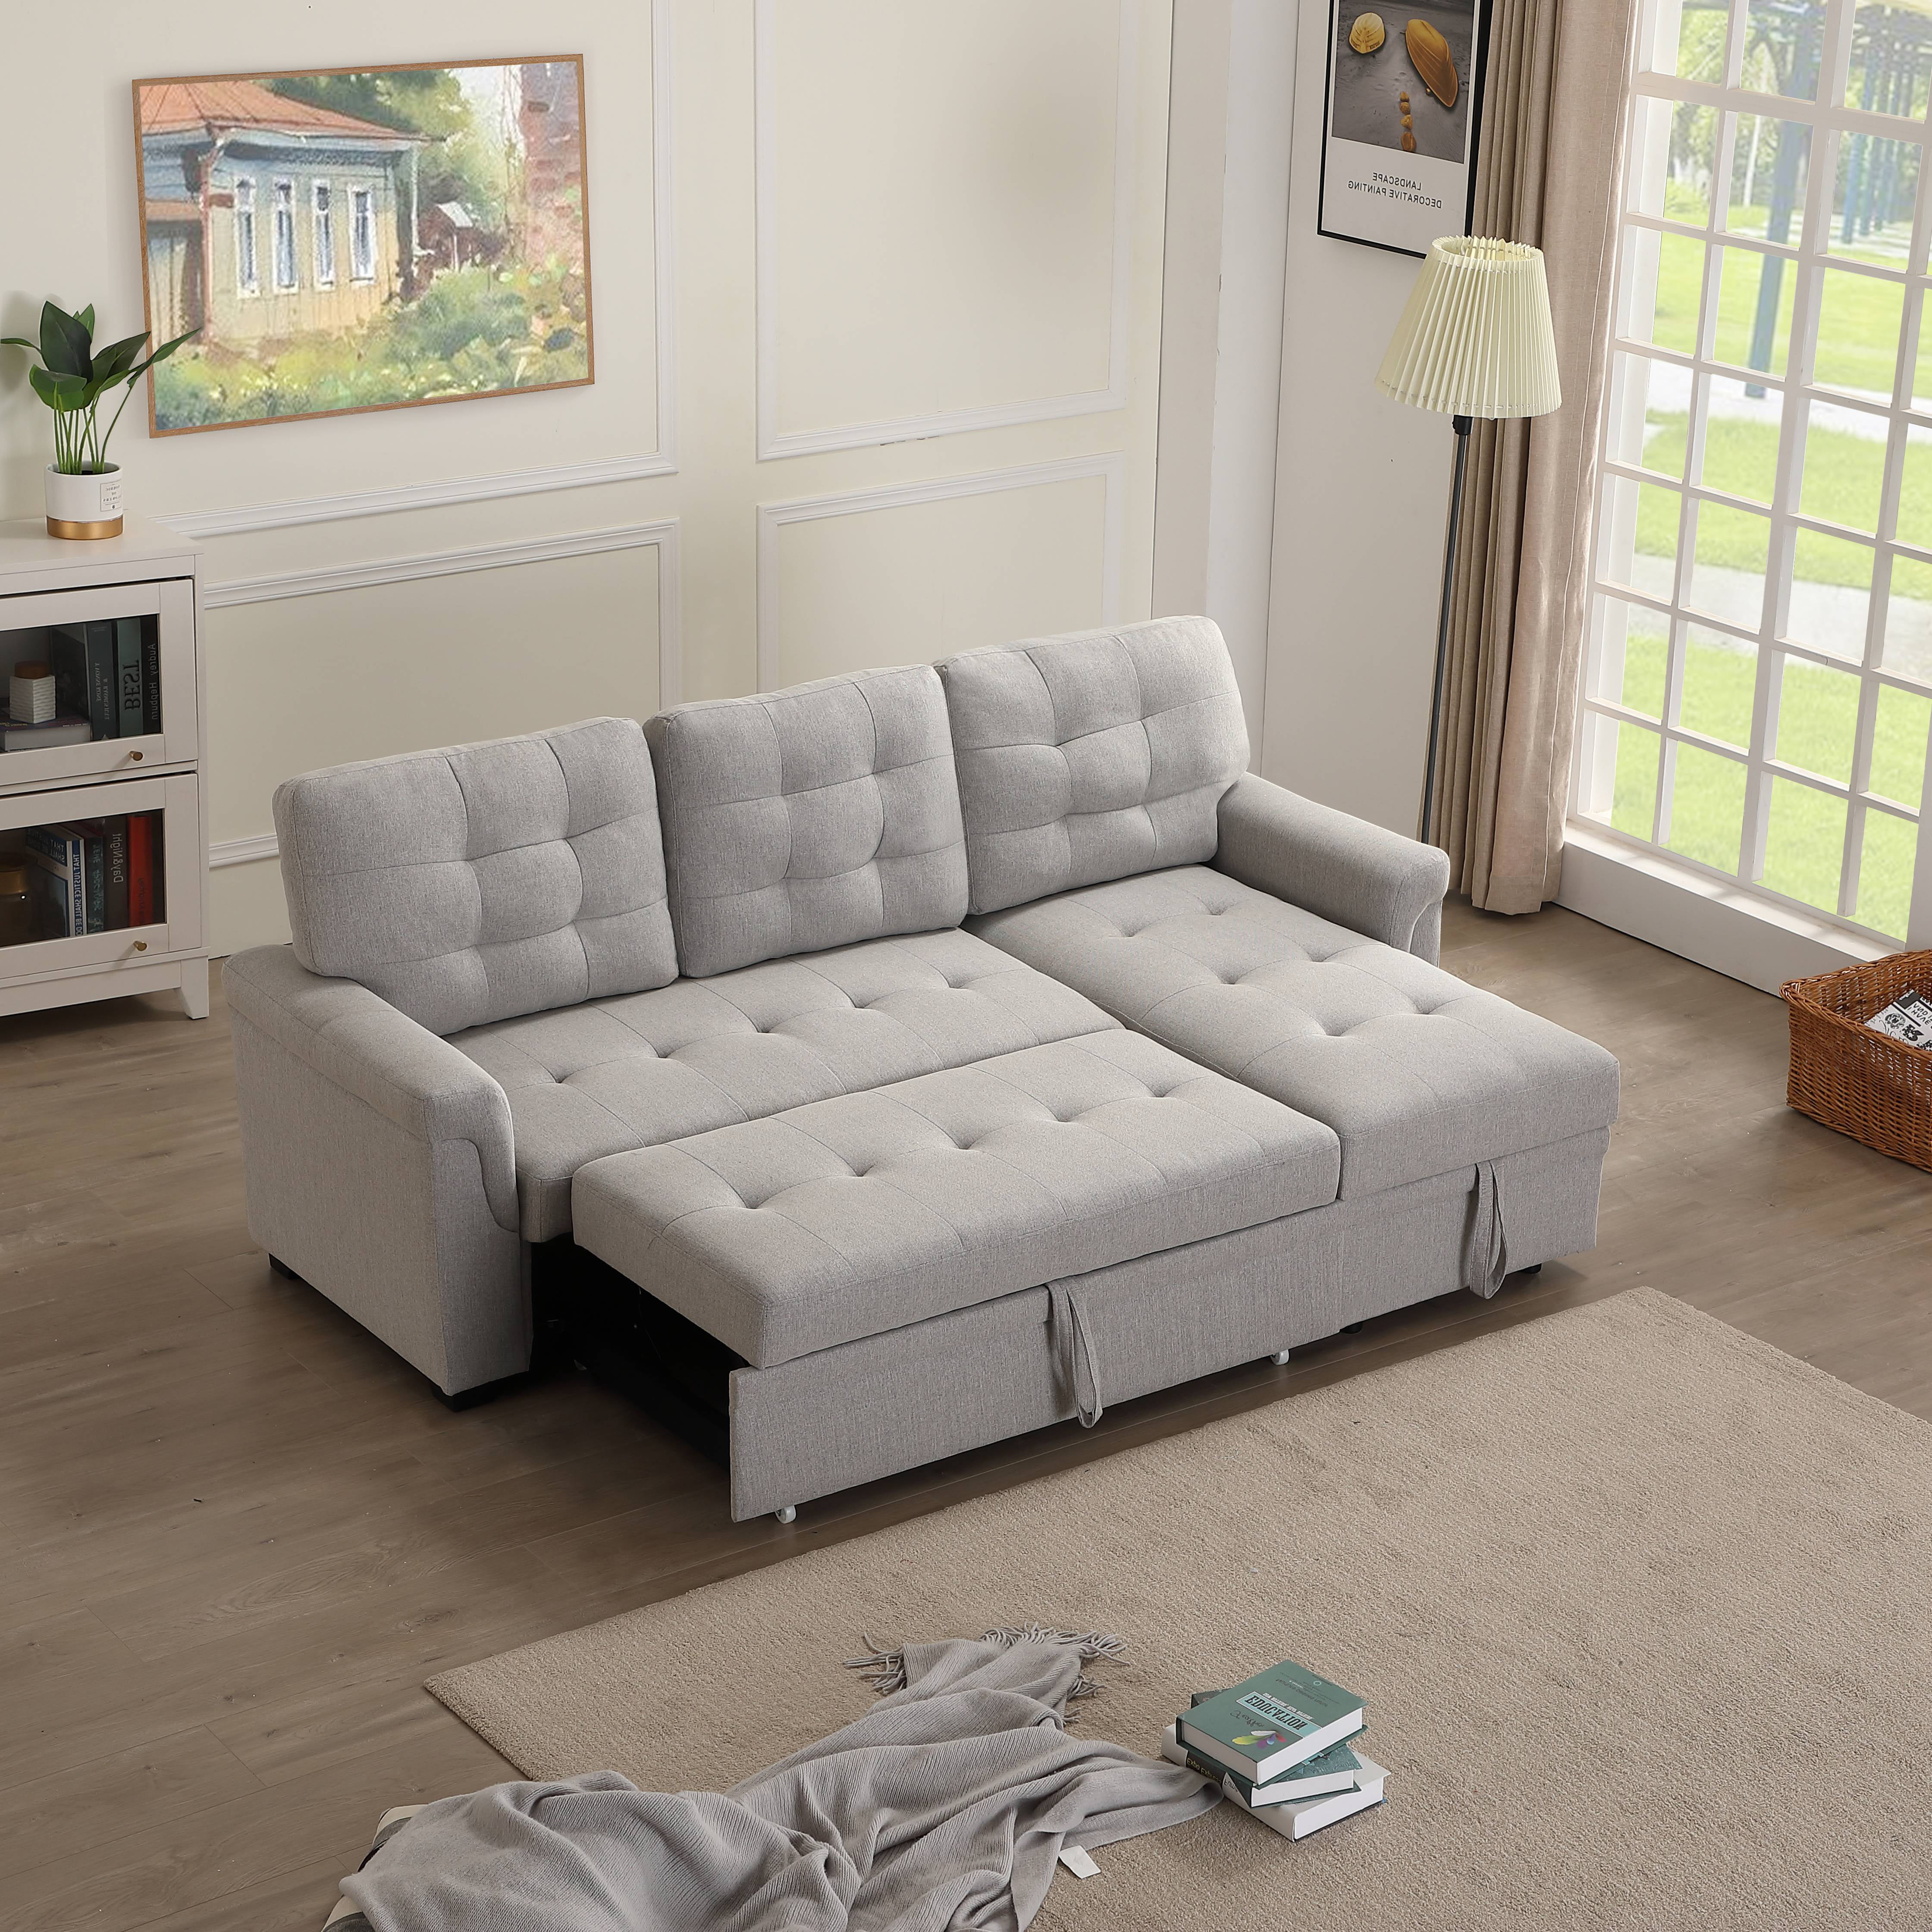 Urhomepro Sectional Sofa Sleeper With, Convertible Sectional Sofa Bed With Chaise